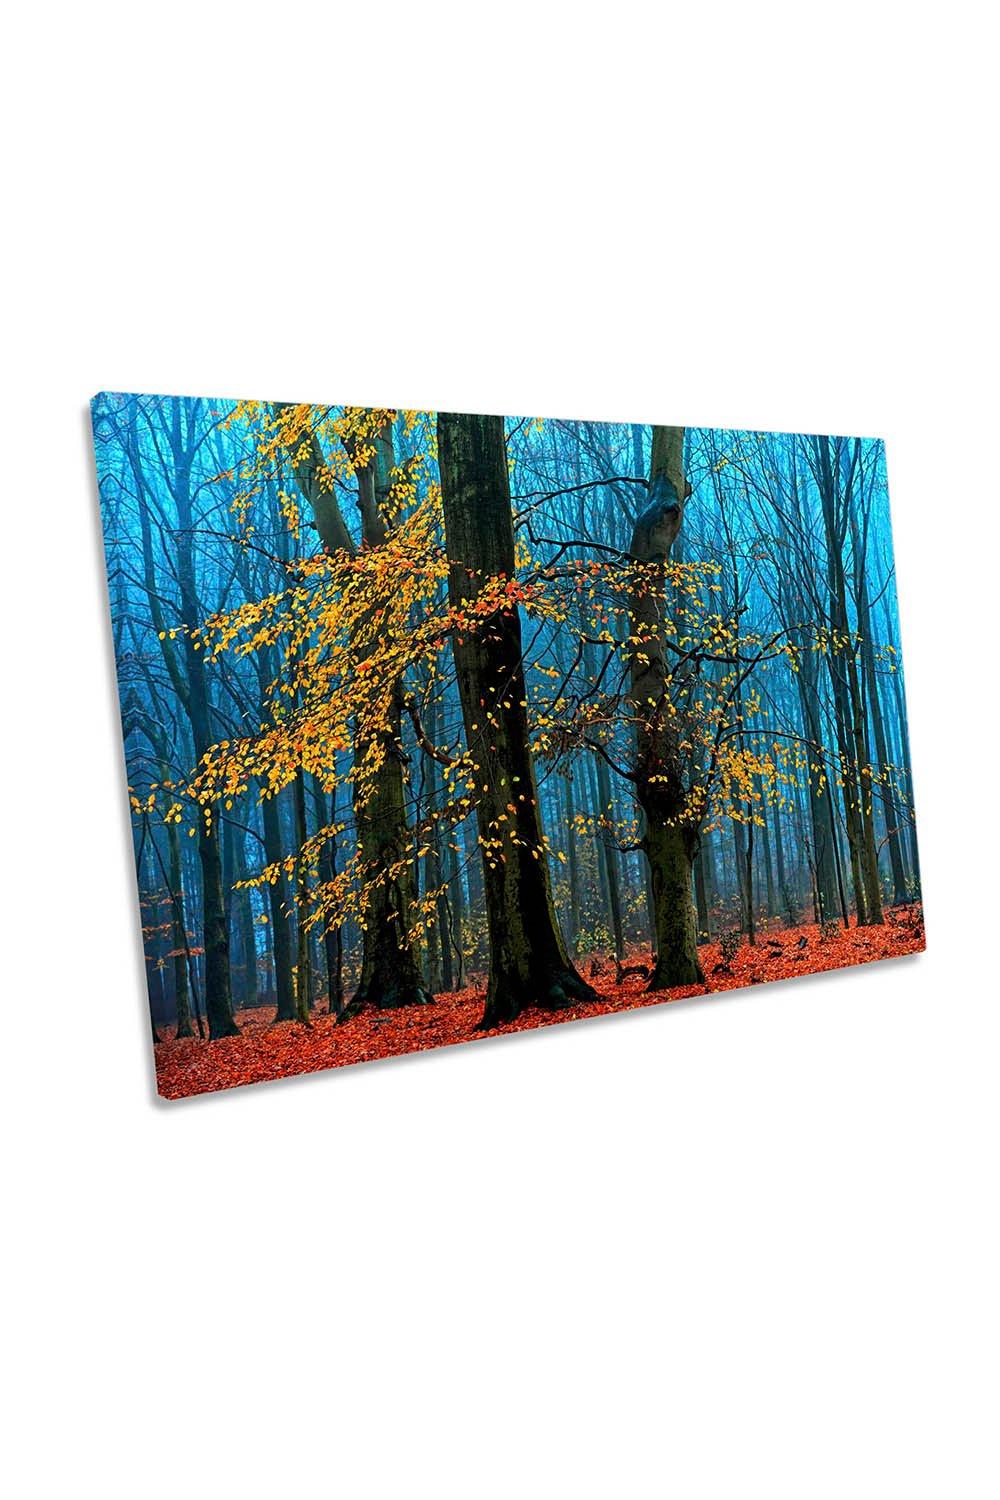 The Supremes Forest Trees Autumn Canvas Wall Art Picture Print